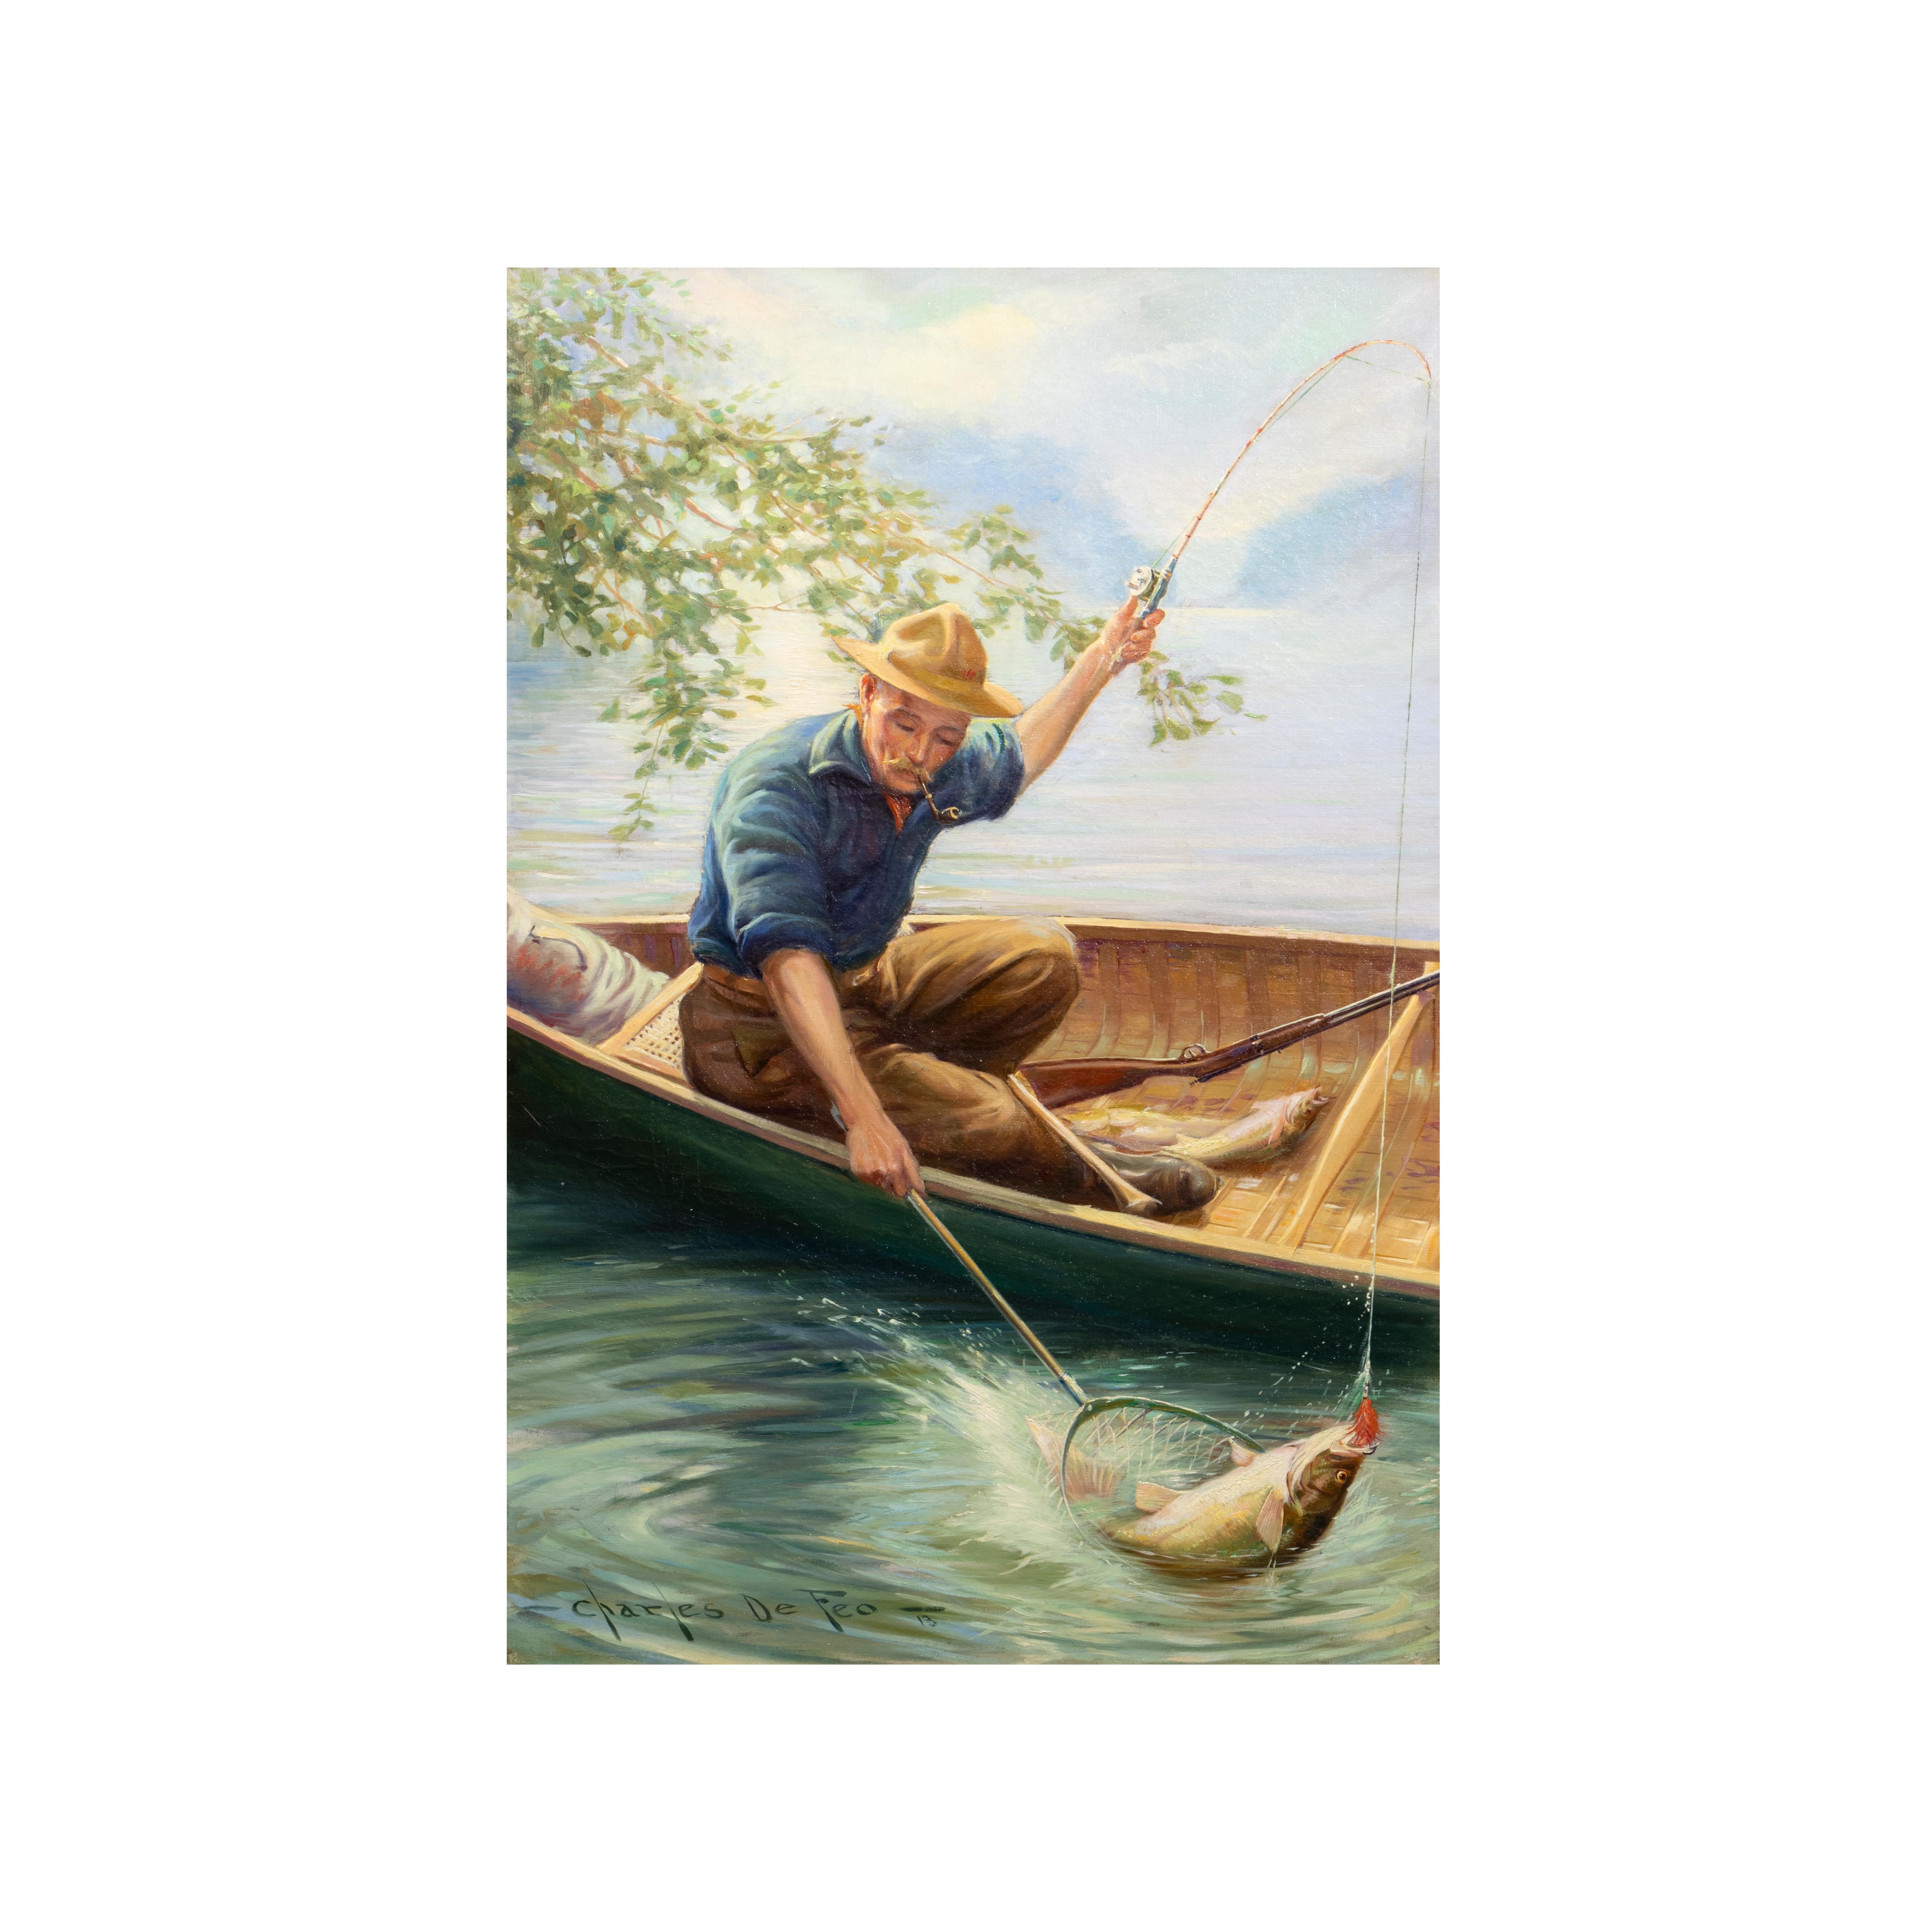 Fisherman's Luck By Charles De Feo.
Item Number: AG1731.

(1892-1978) Oil on canvas; 30